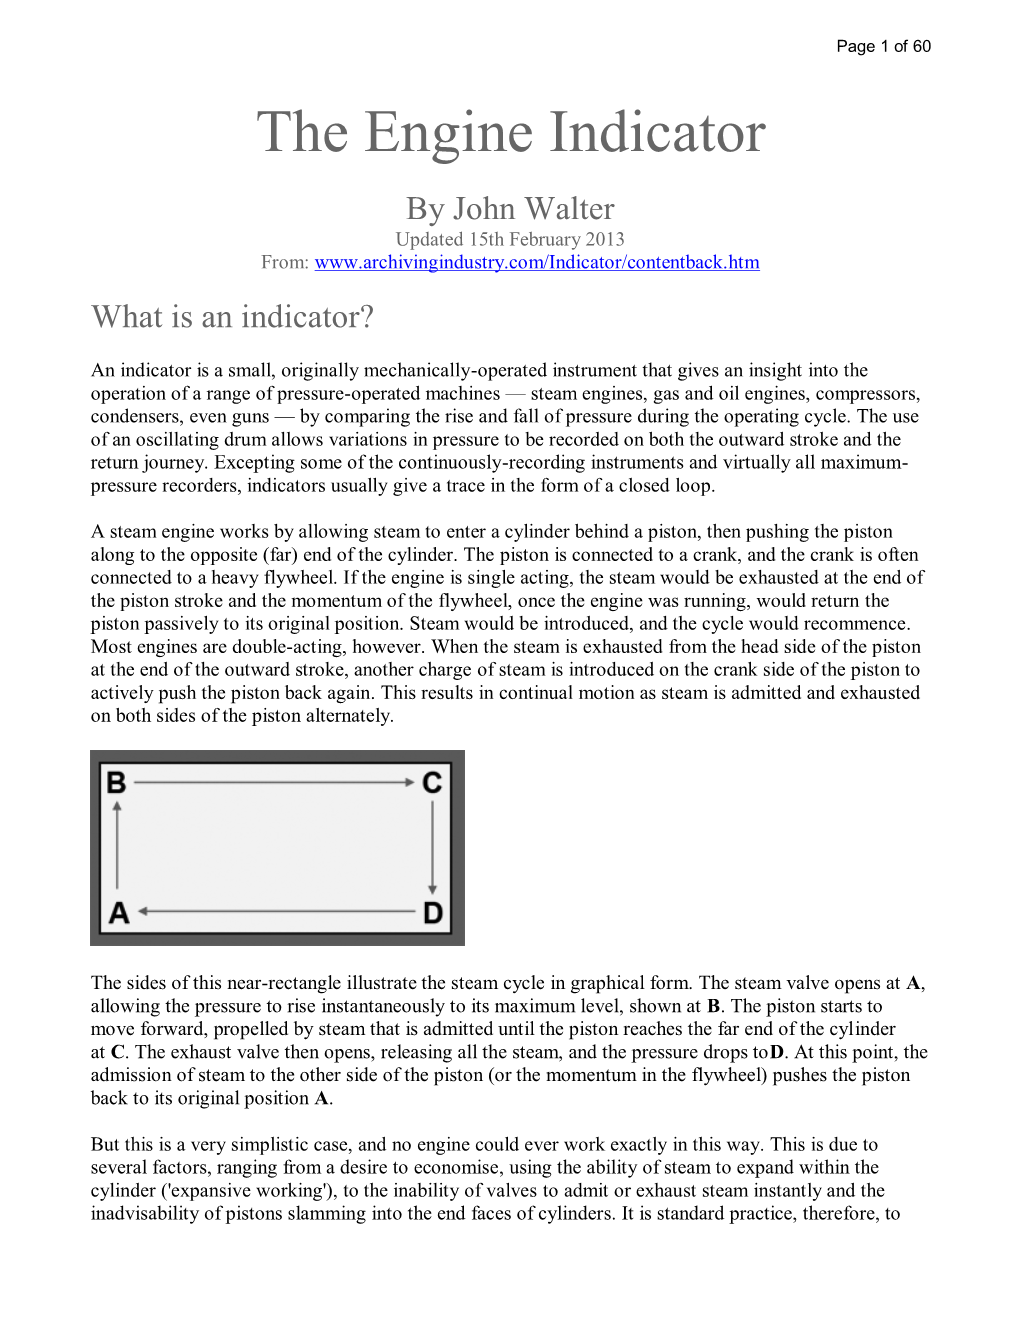 The Engine Indicator by John Walter Updated 15Th February 2013 From: What Is an Indicator?